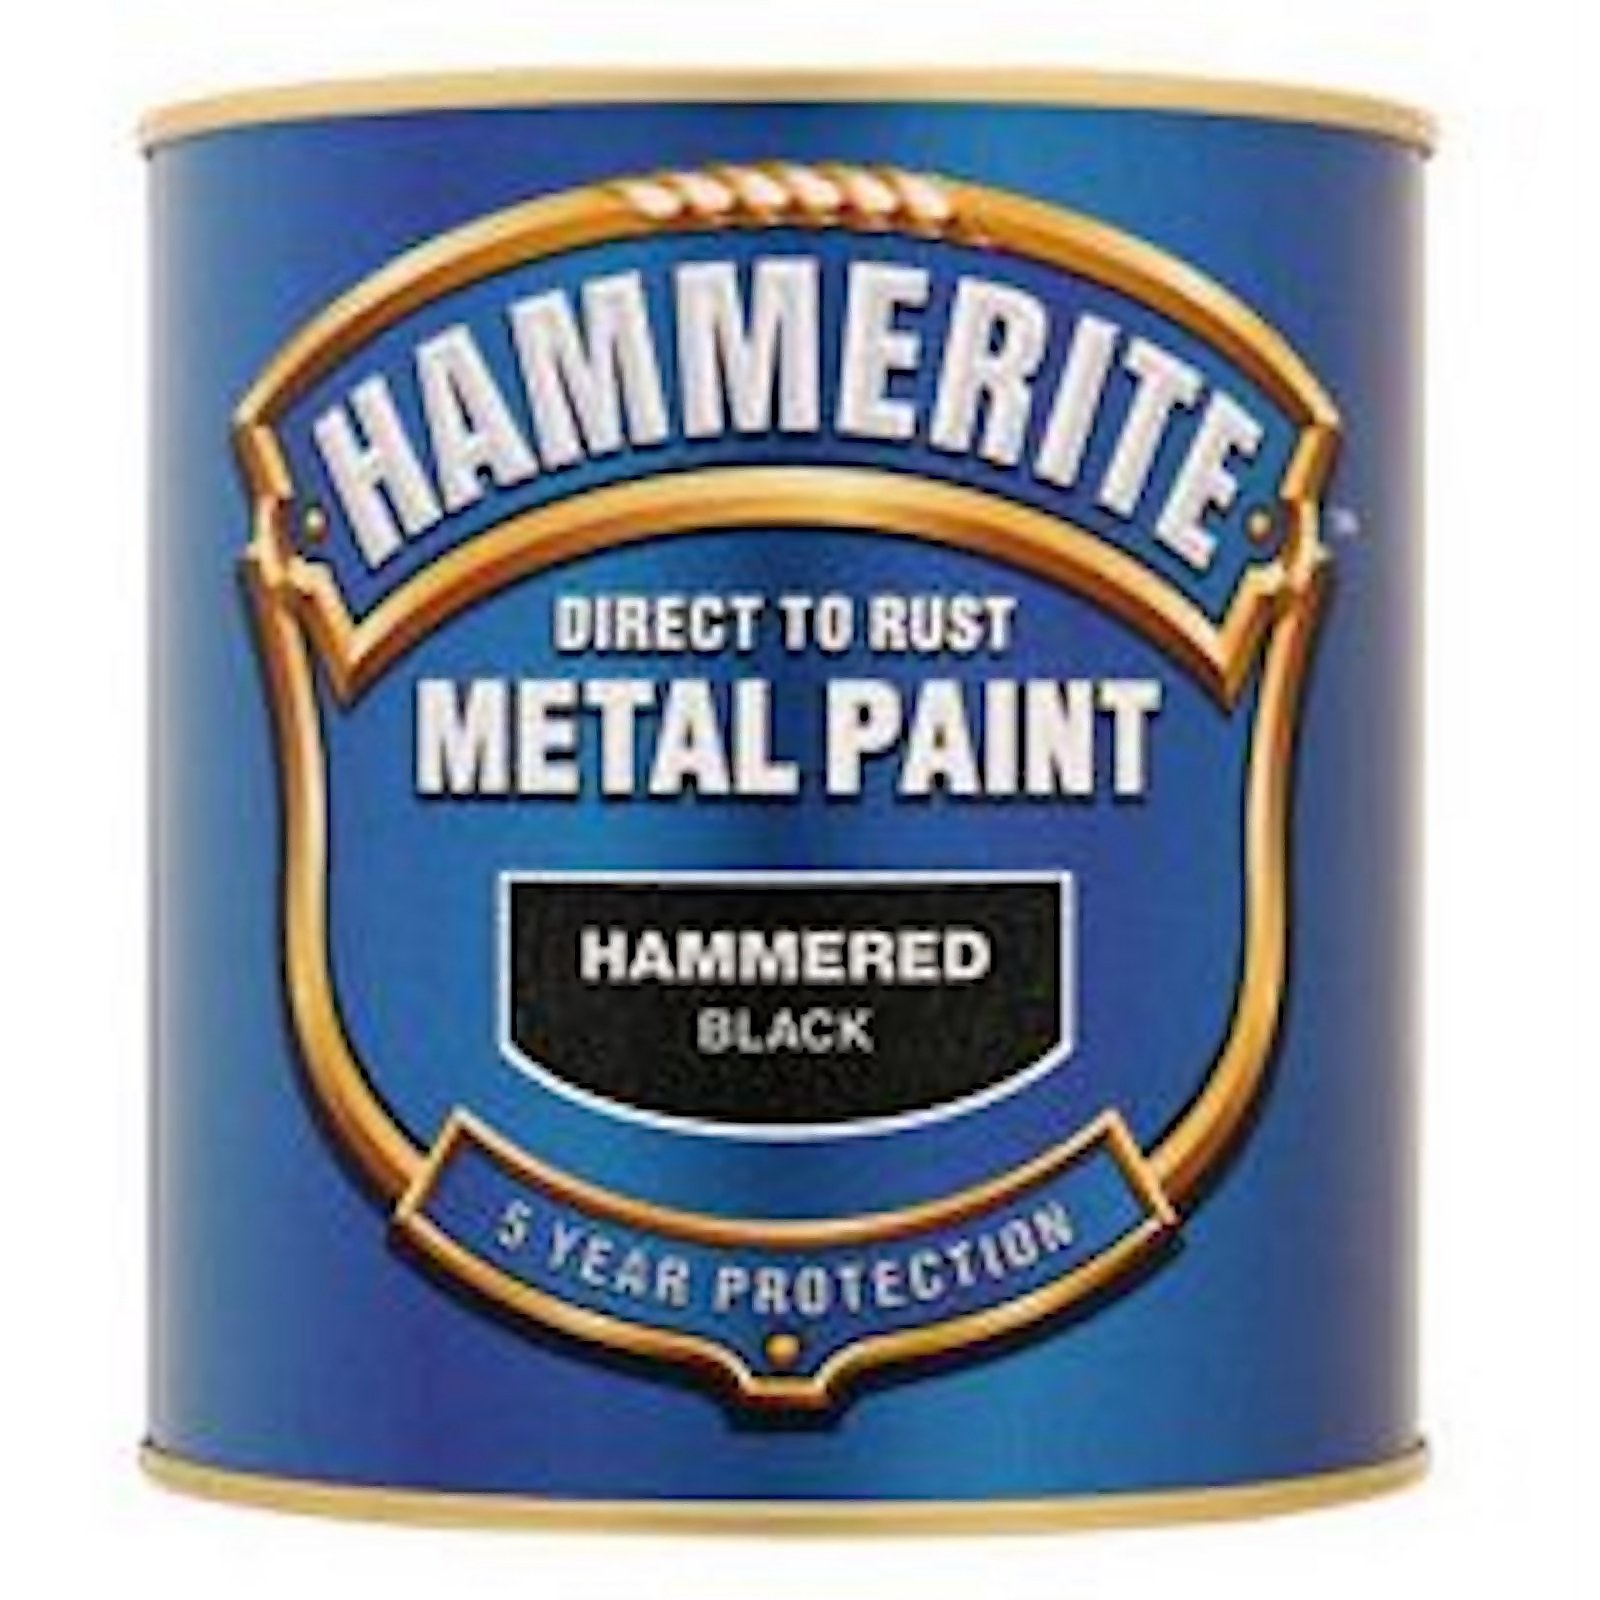 Hammerite Direct to Rust Metal Paint Hammered Black - 2.5L